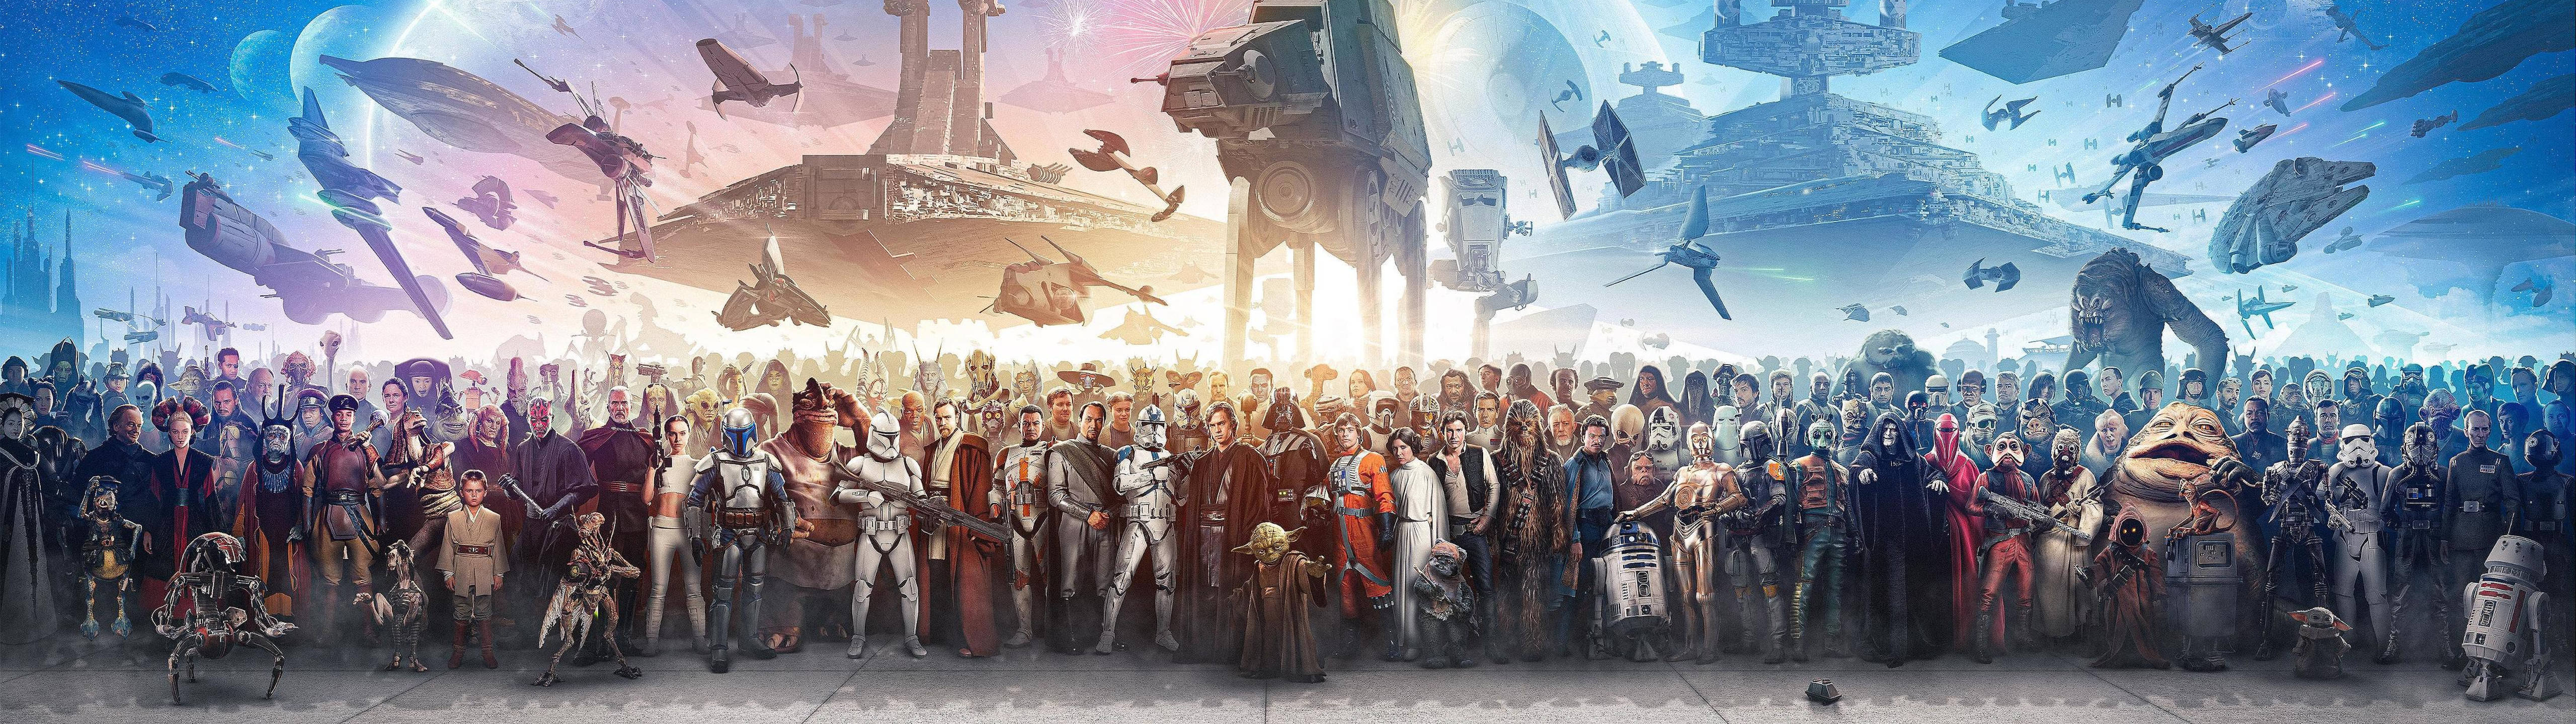 5120x1440 Game Star Wars Characters Wallpaper